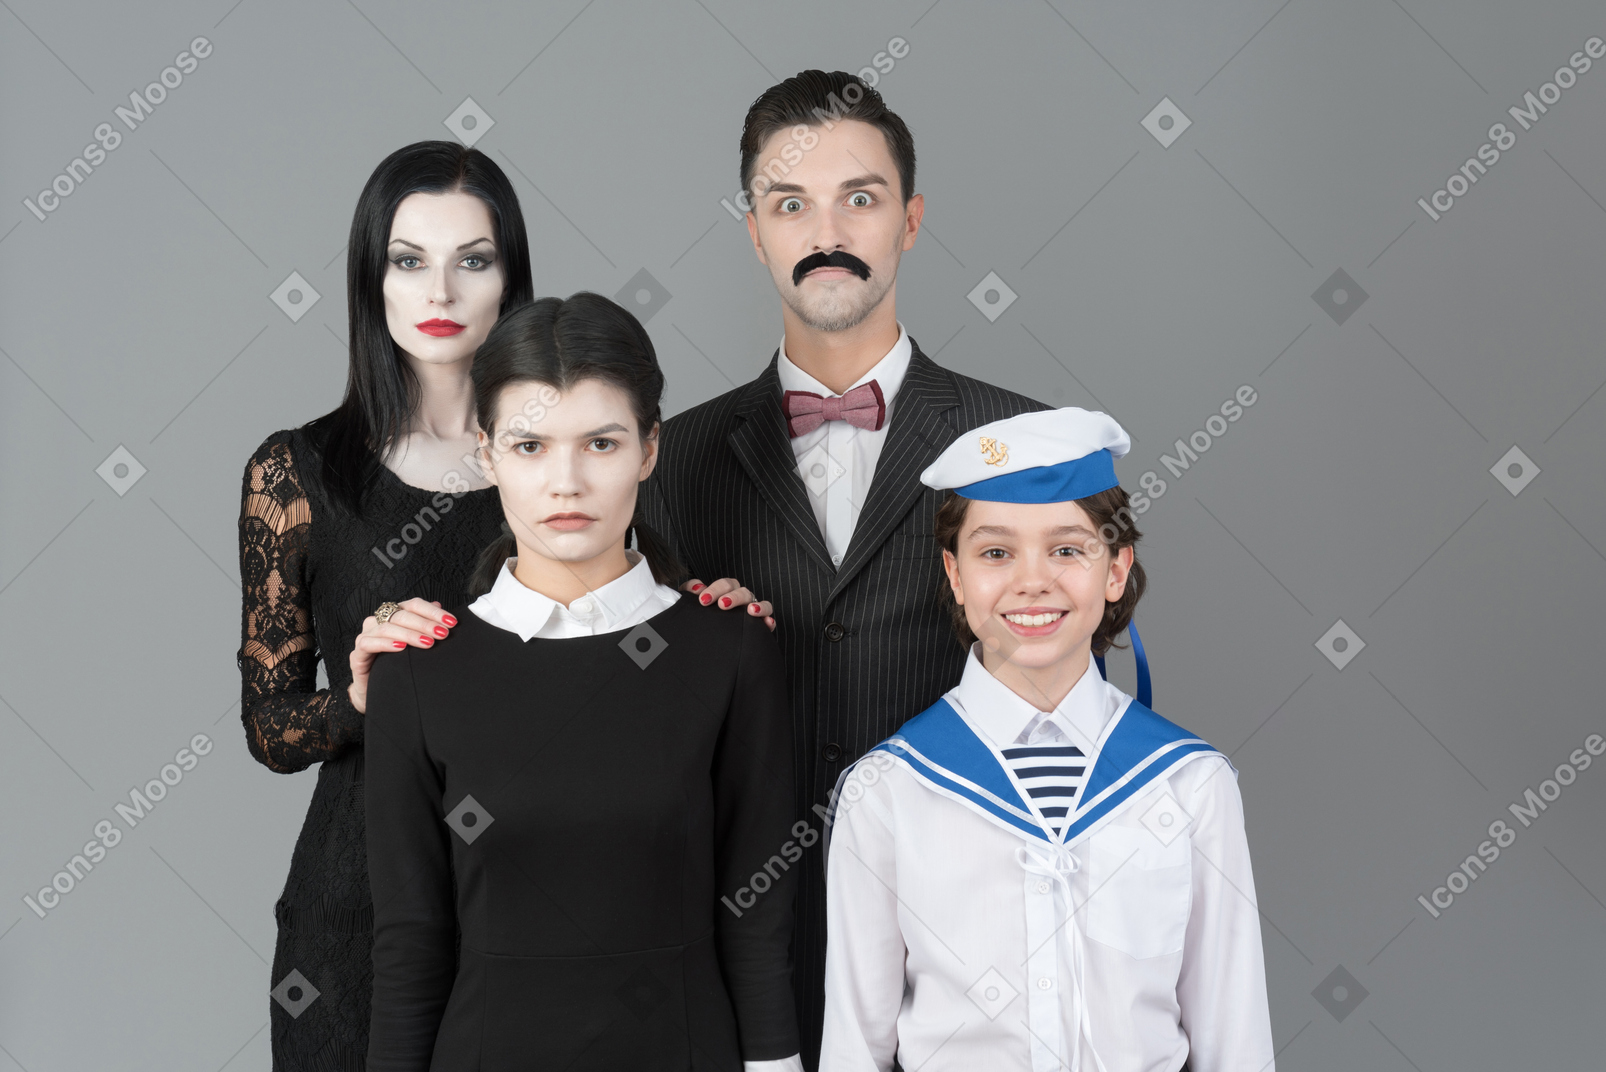 Addams family members aren't contented with boy in sailor's uniform